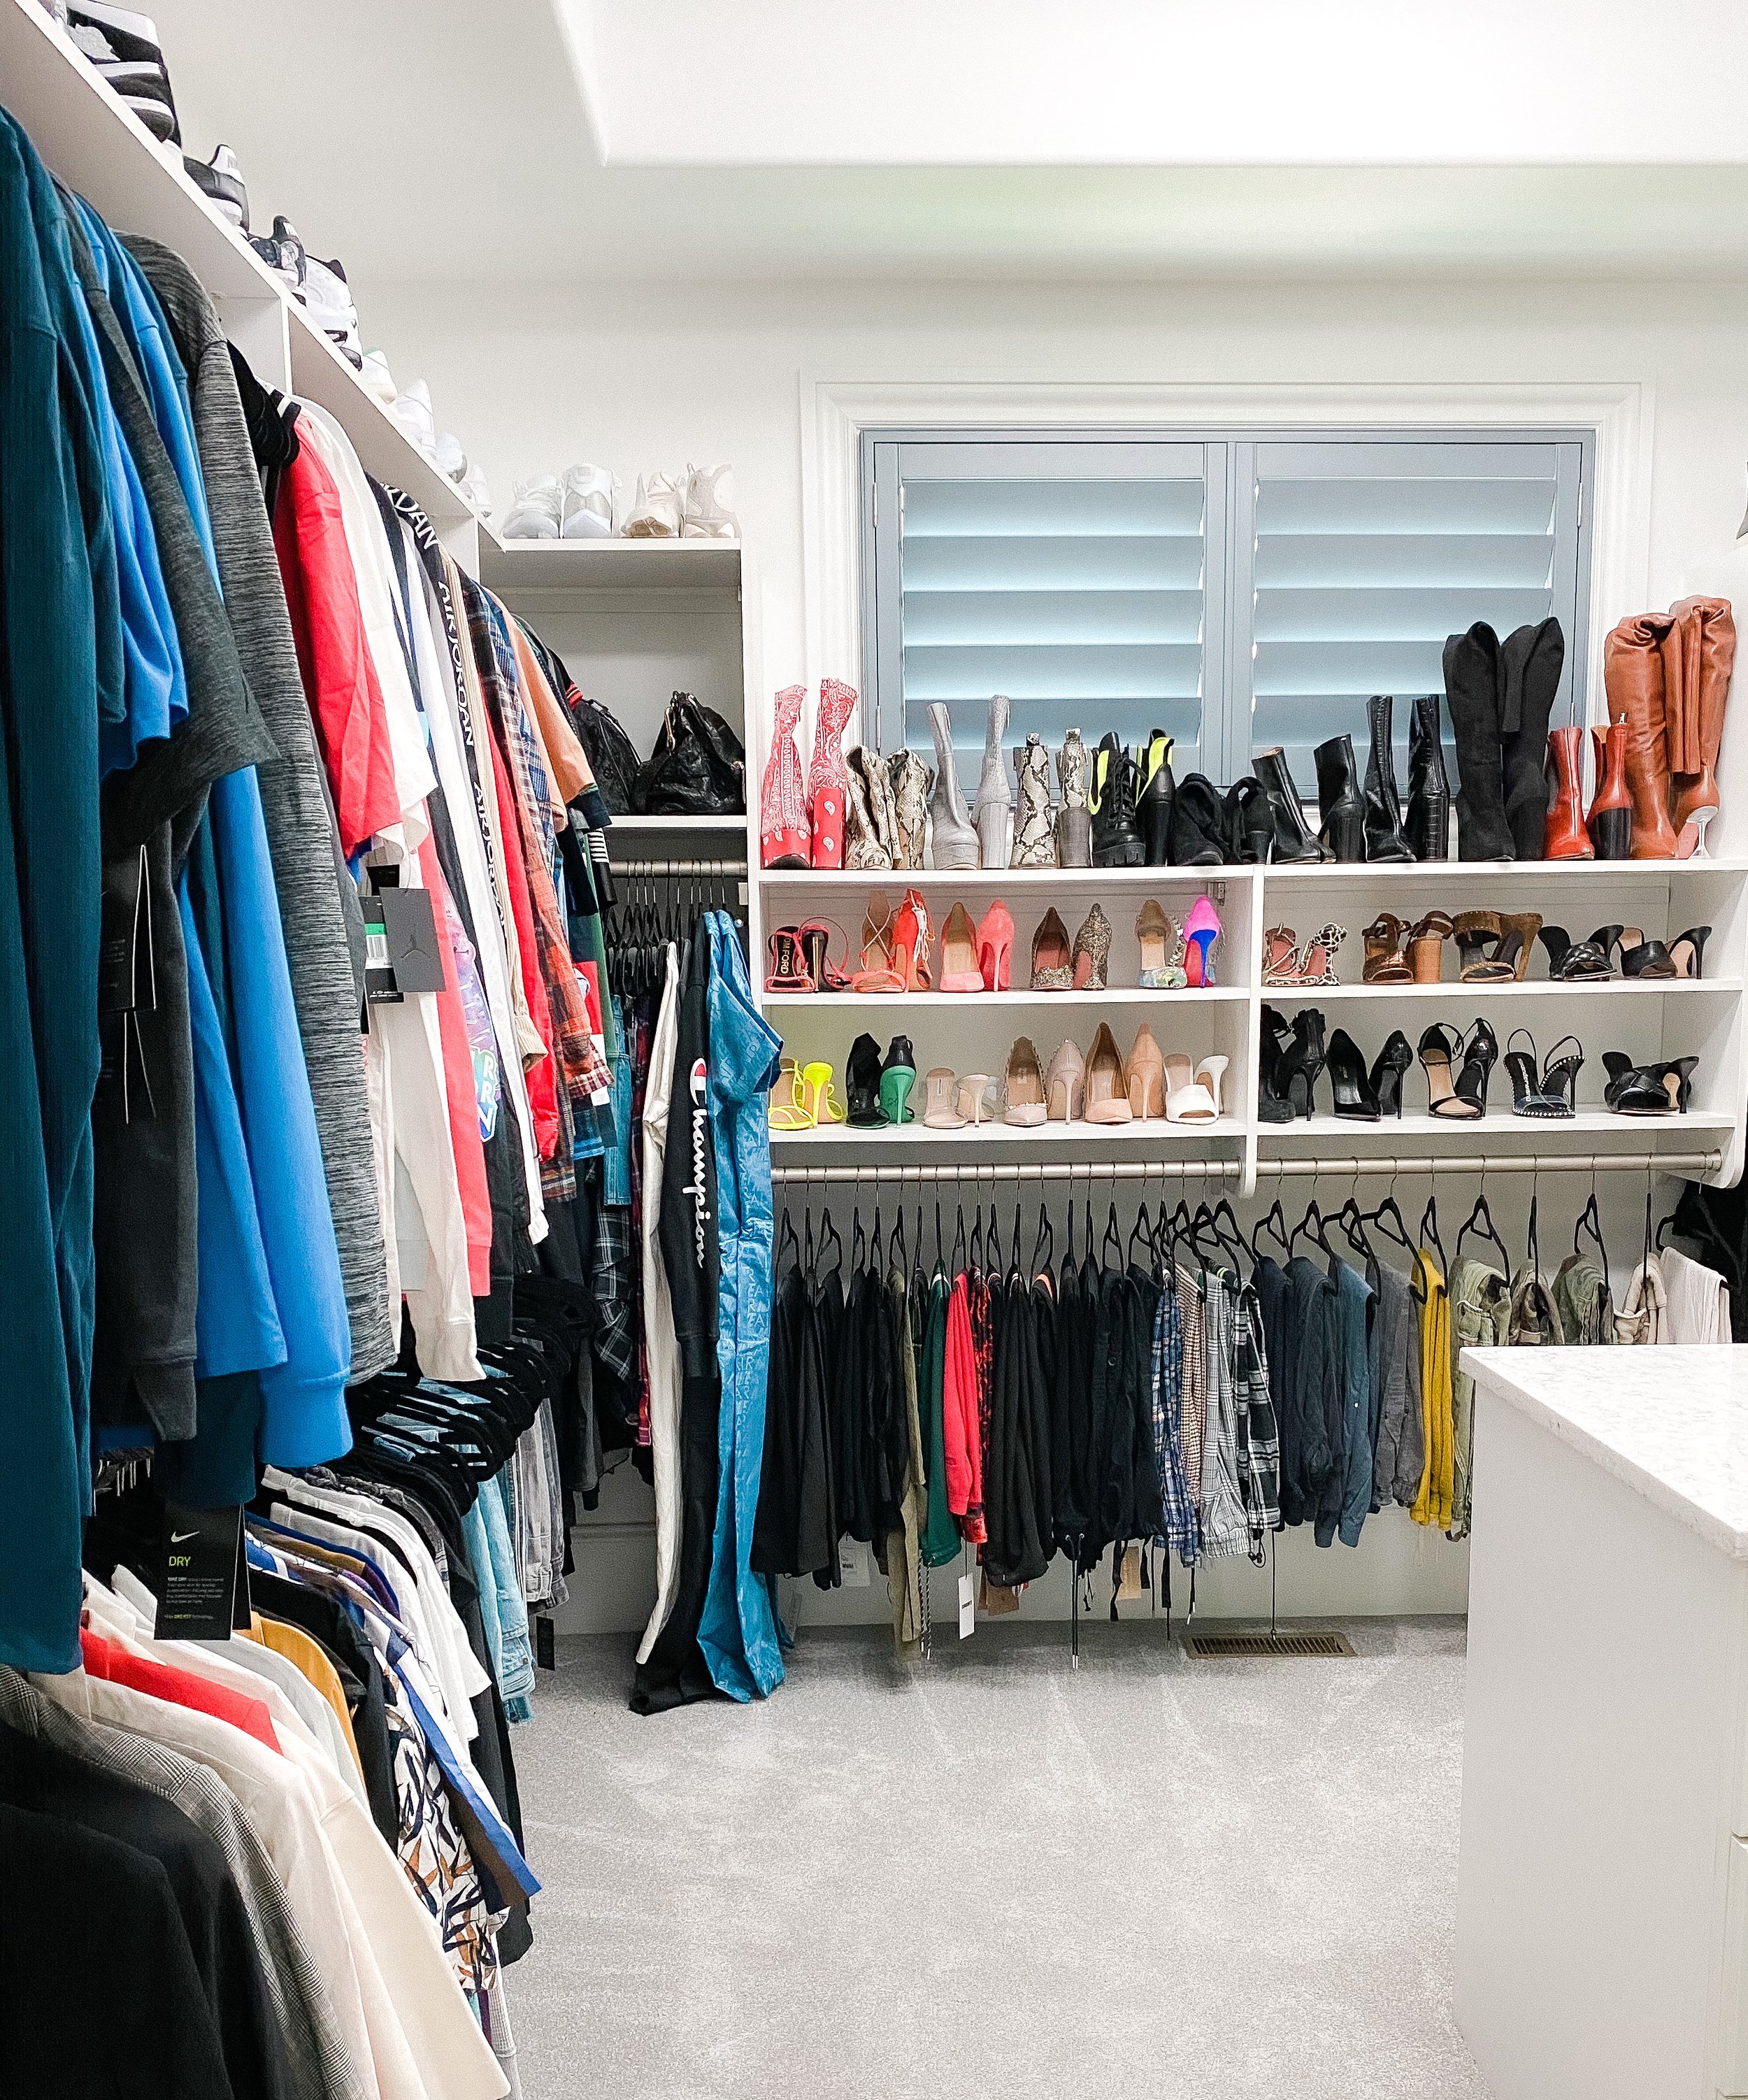 Organized and styled closet after being unpacked after moving